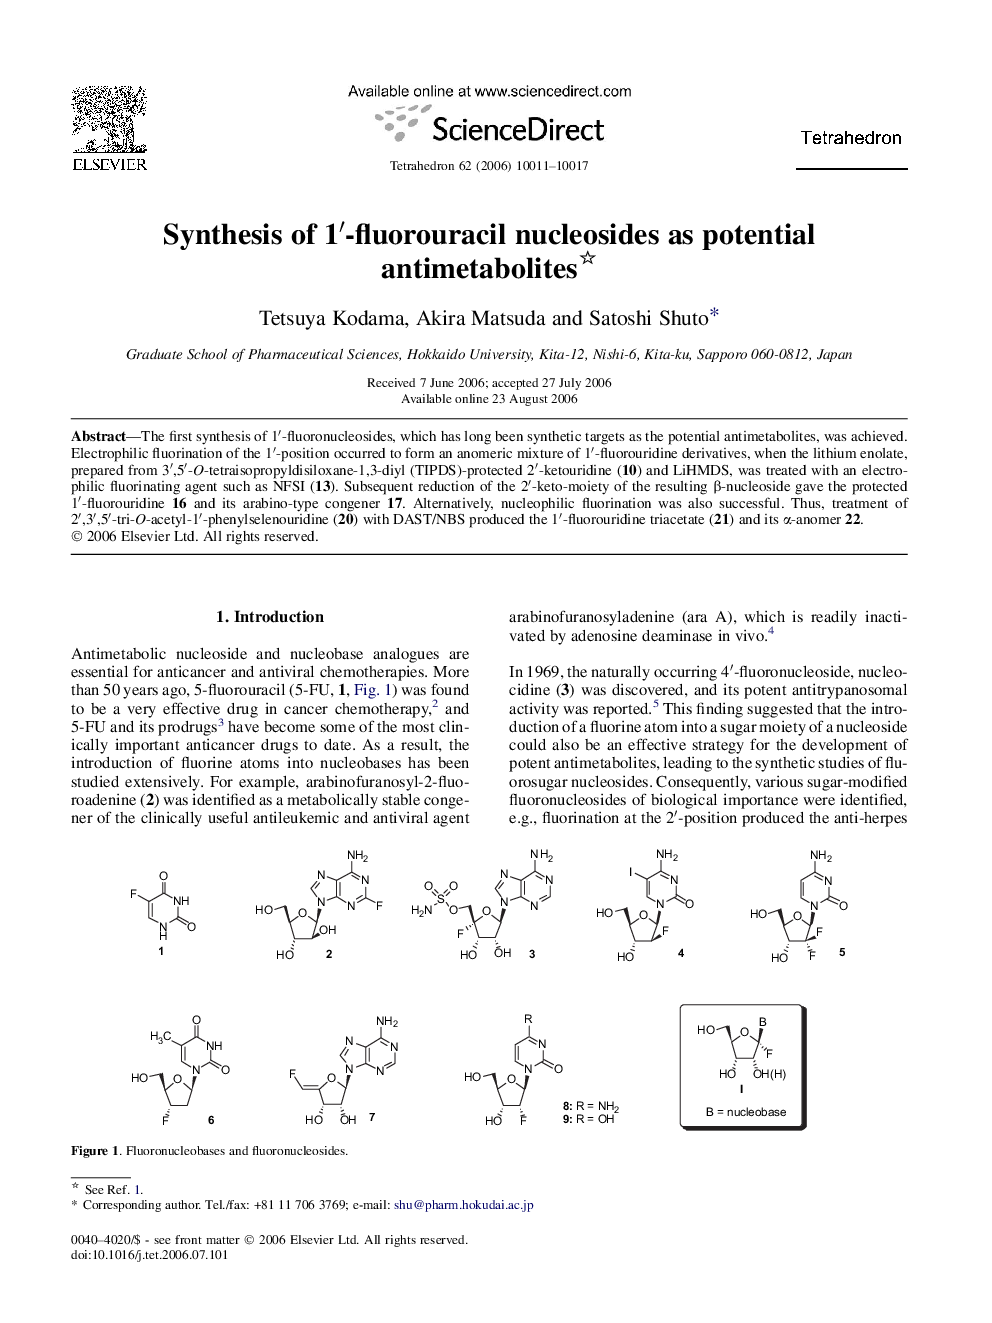 Synthesis of 1â²-fluorouracil nucleosides as potential antimetabolites